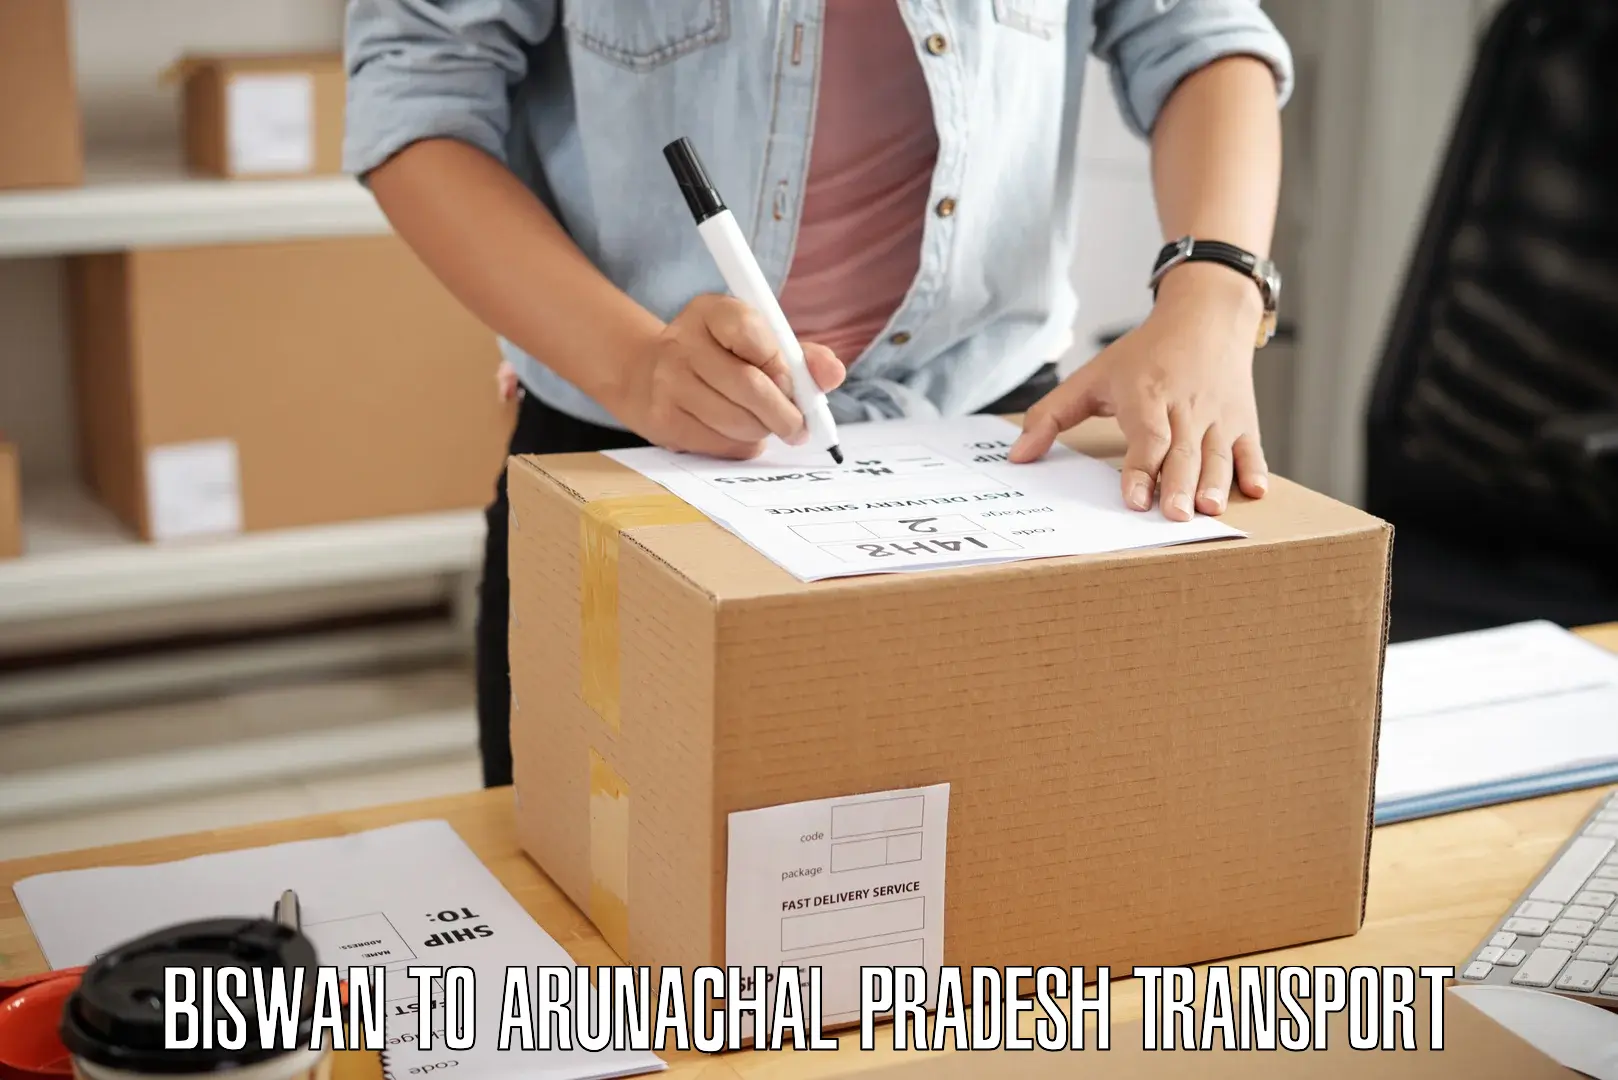 Daily parcel service transport Biswan to Aalo